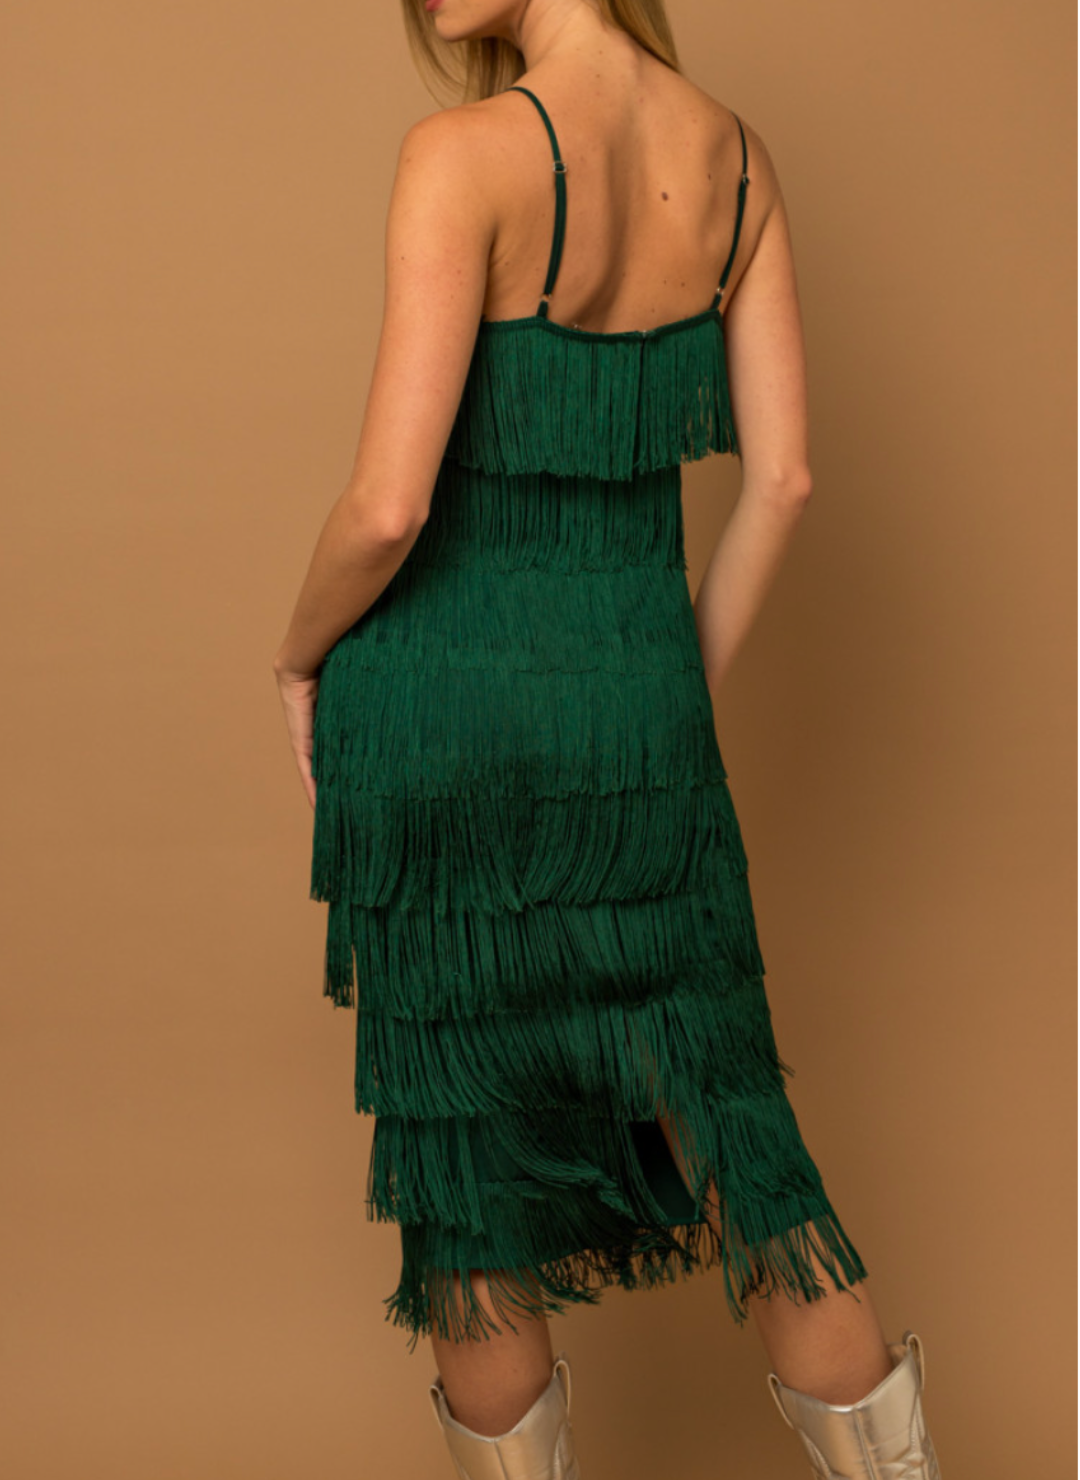 Back view of model wearing Gi Fringe Strap Dress with vibrant green color and fun fringe.